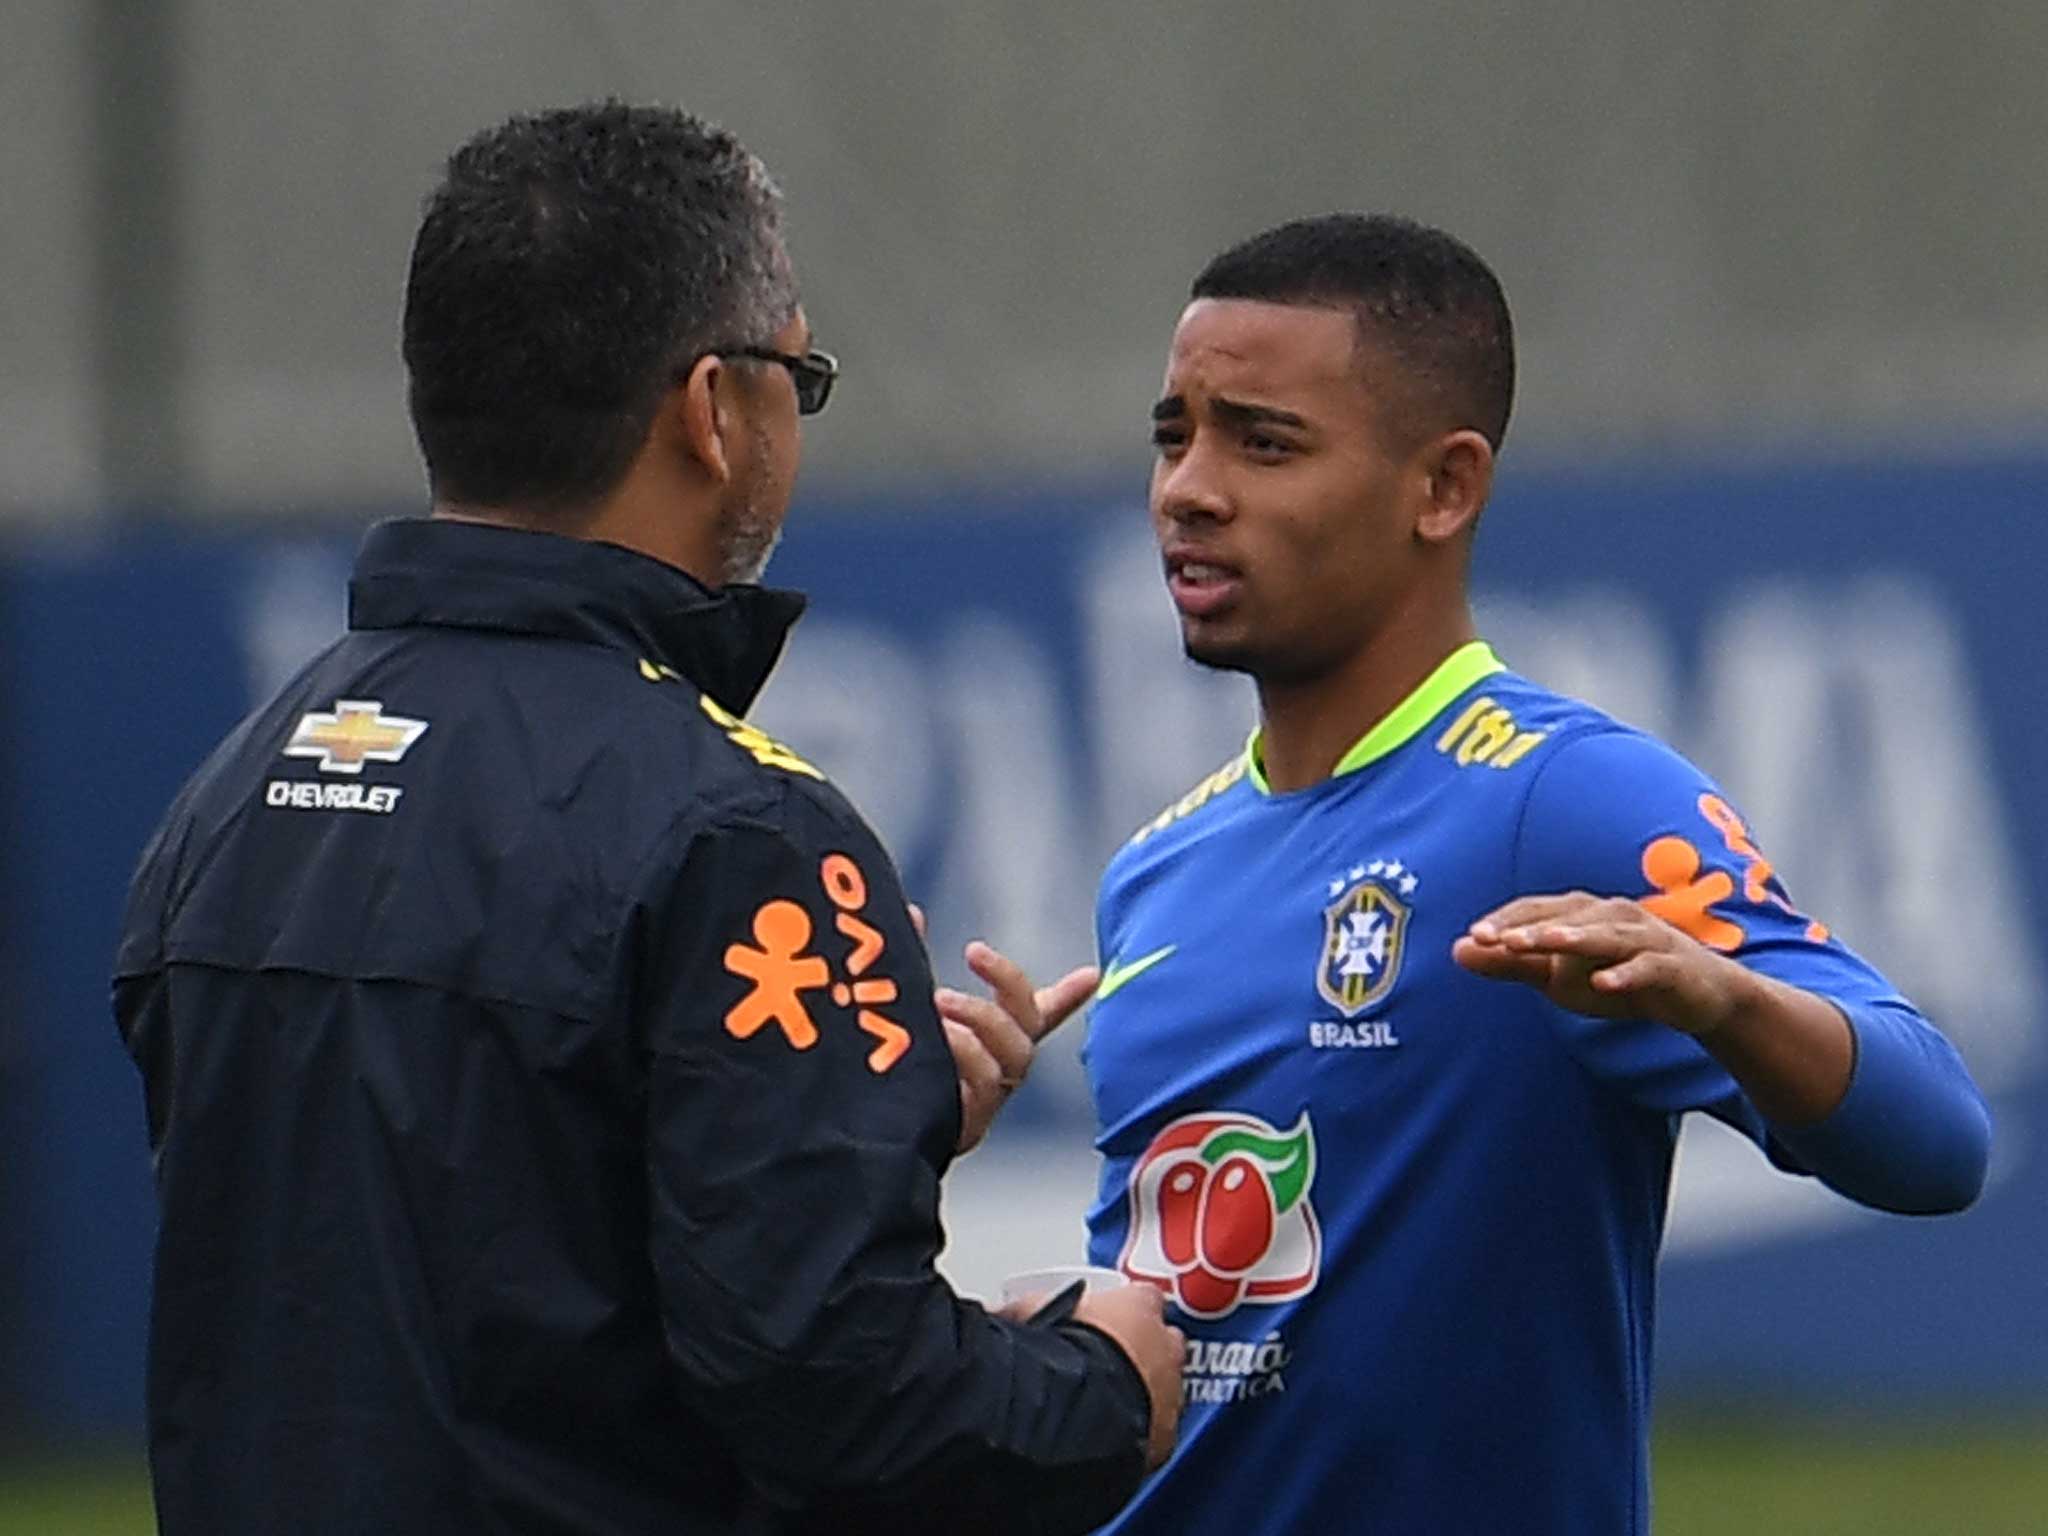 Gabriel Jesus is expected to link-up with Manchester City this summer